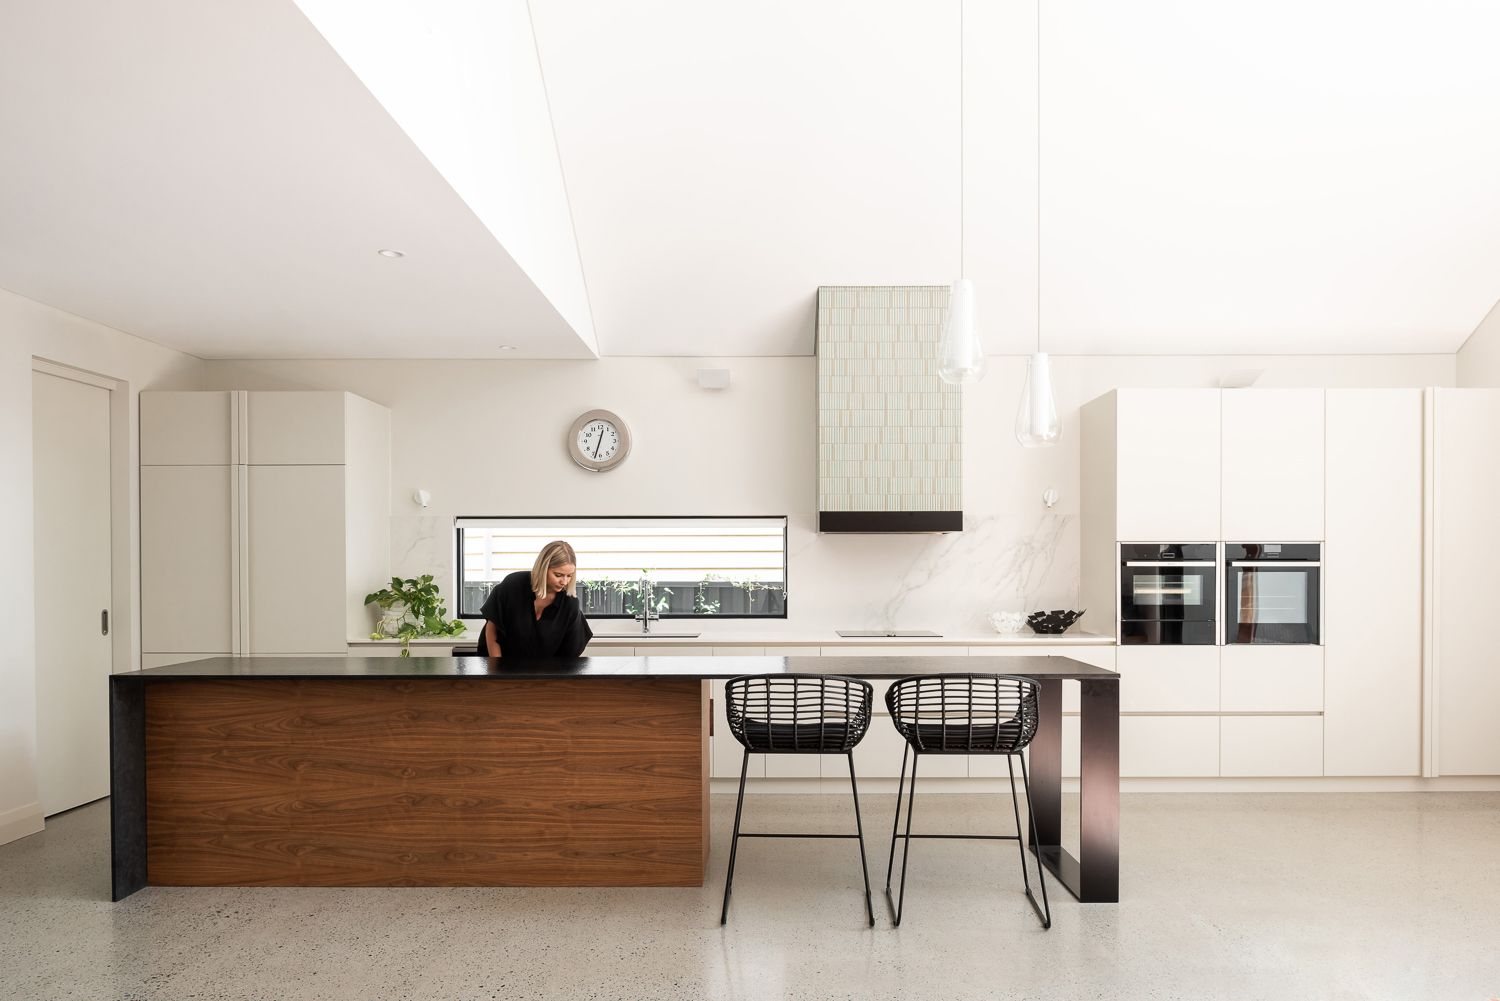 Subiaco House by Robeson Architects. Modern, minimalistic kitchen with white cabinetry and feature timber island bench with black metal benchtop. Whie warble floor-to-ceiling splashback. 